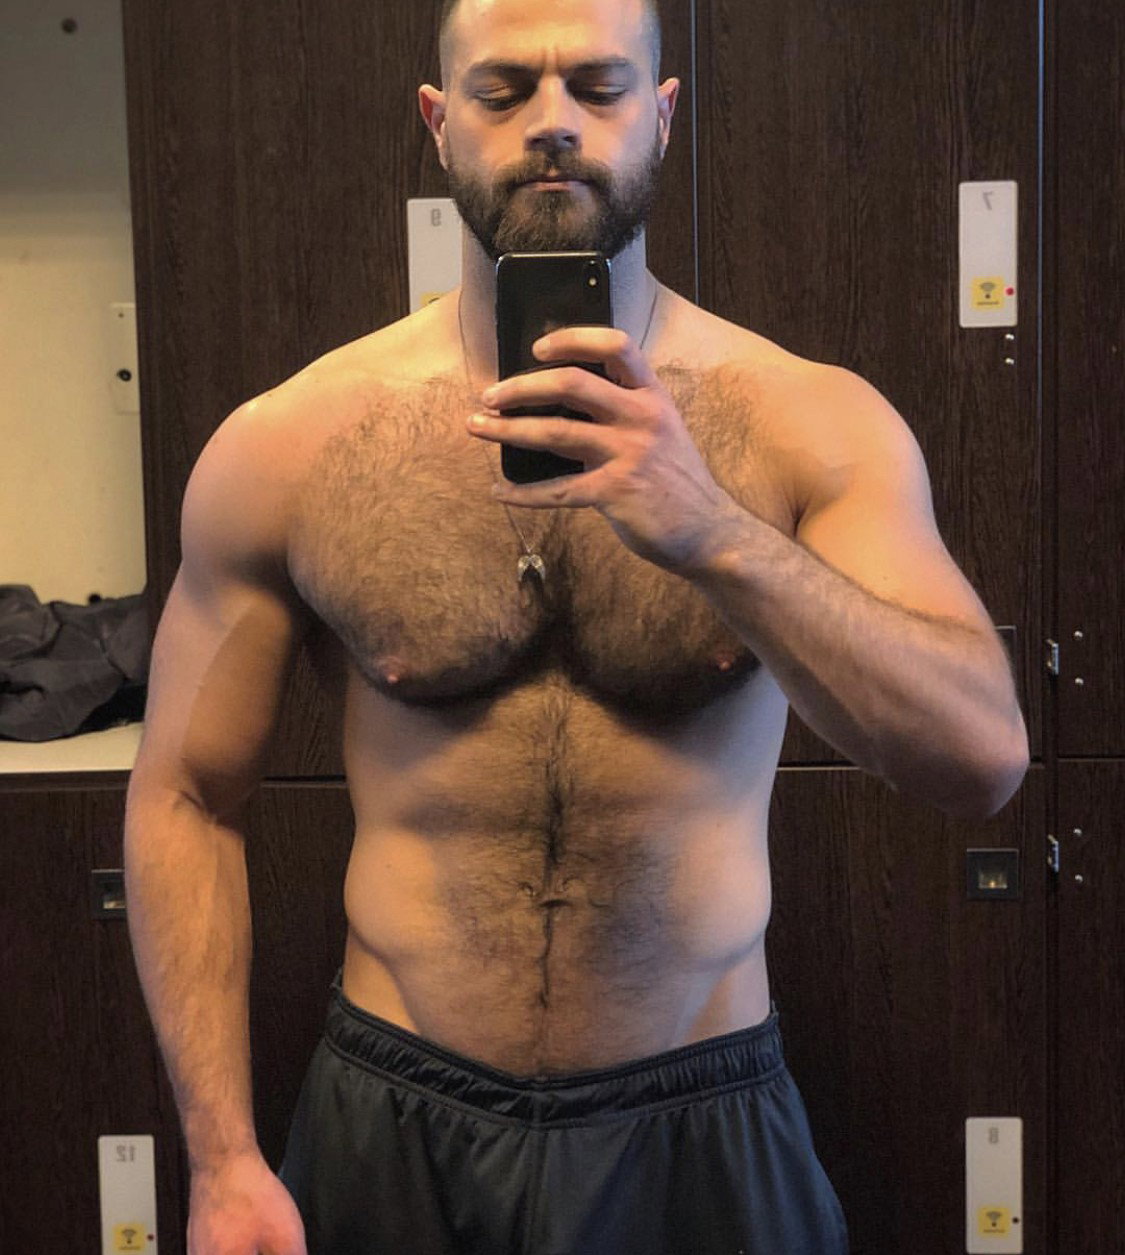 Watch the Photo by R__gay with the username @Rgay, posted on April 18, 2019. The post is about the topic Gay Hairy Men. and the text says '#gayhairy #germangay 🤤'